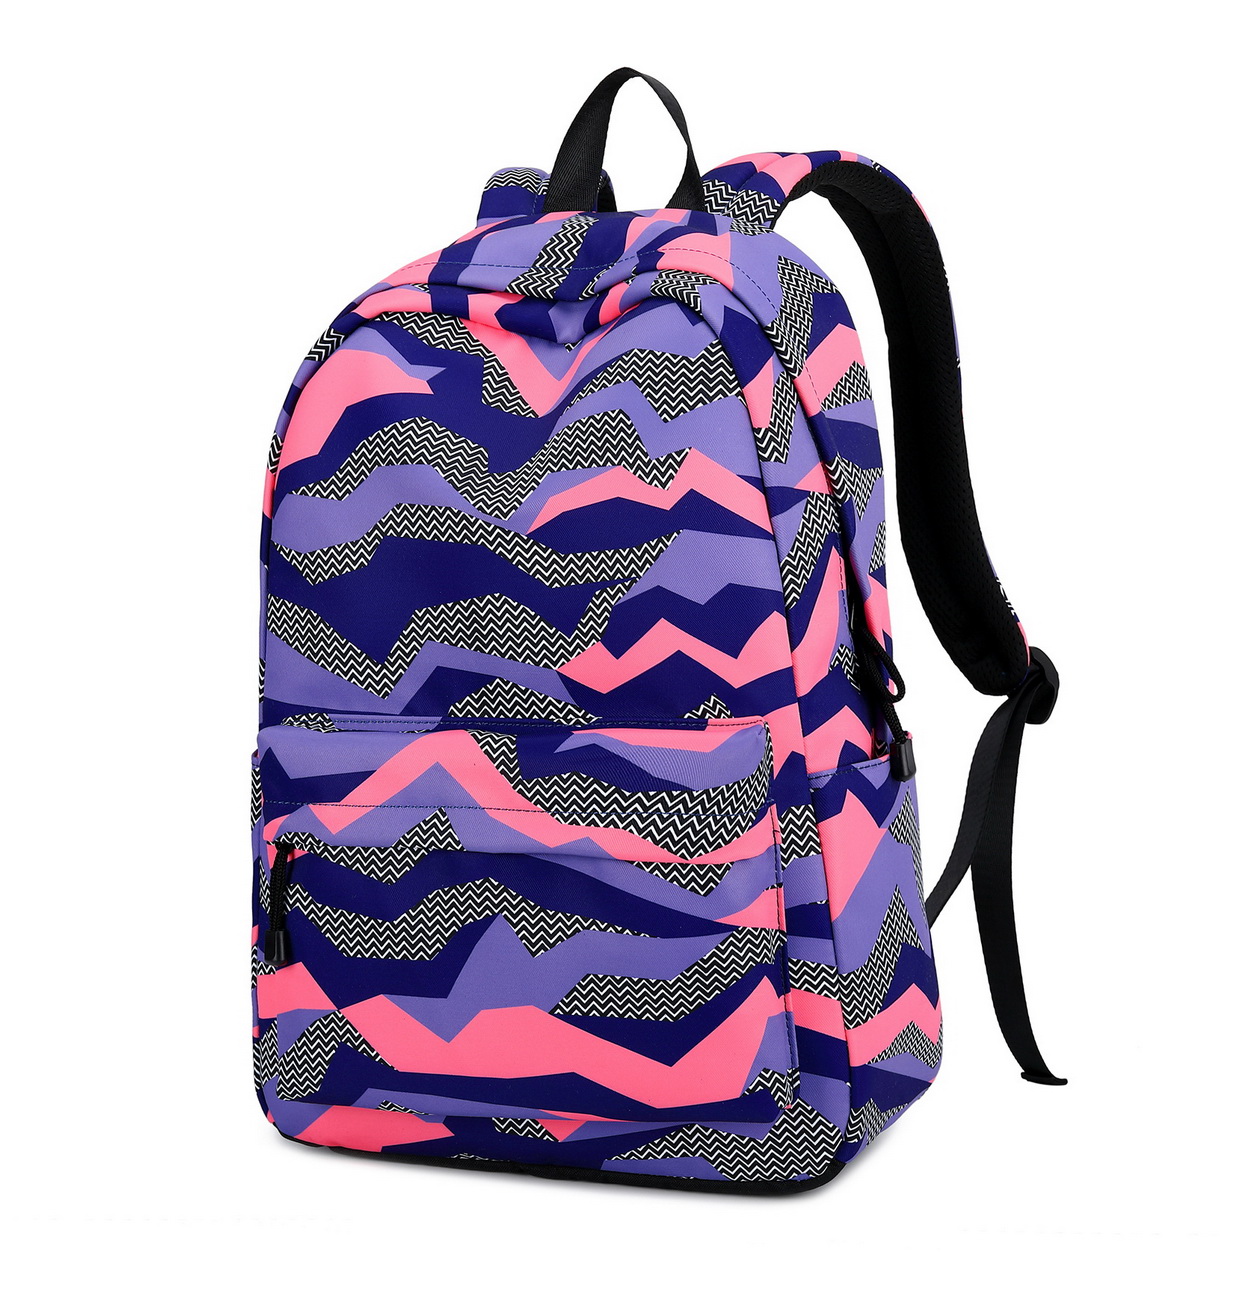 QMAILX Waterproof Fashion Printed Backpack for Girl